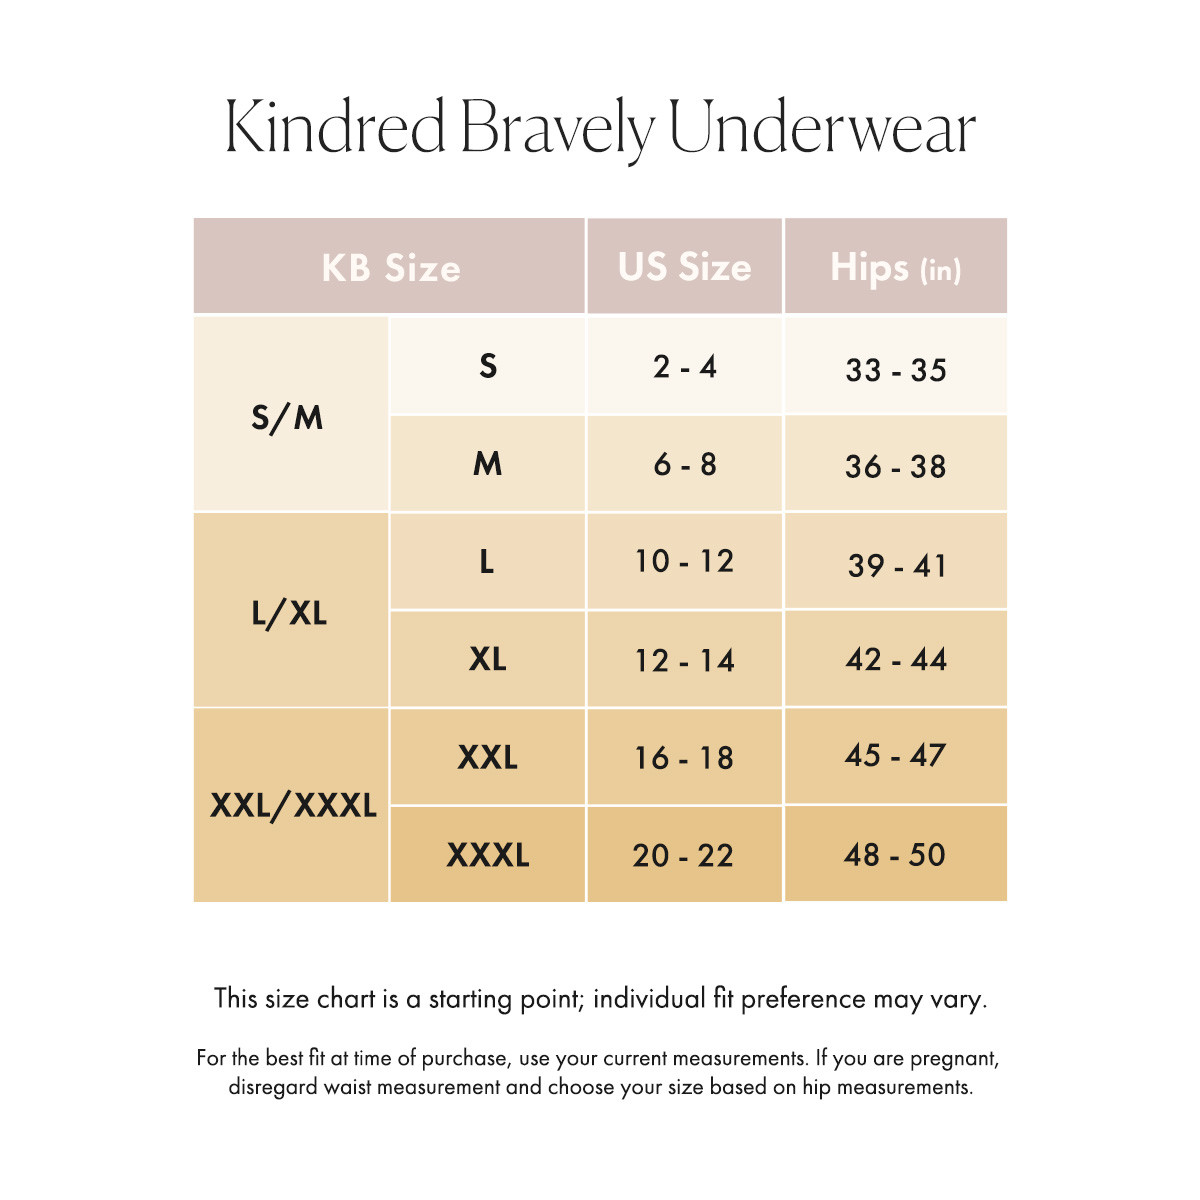 Kindred Bravely High Waist Postpartum Underwear & C-Section Recovery Maternity Panties (5 Pack) - Neutrals, Medium.